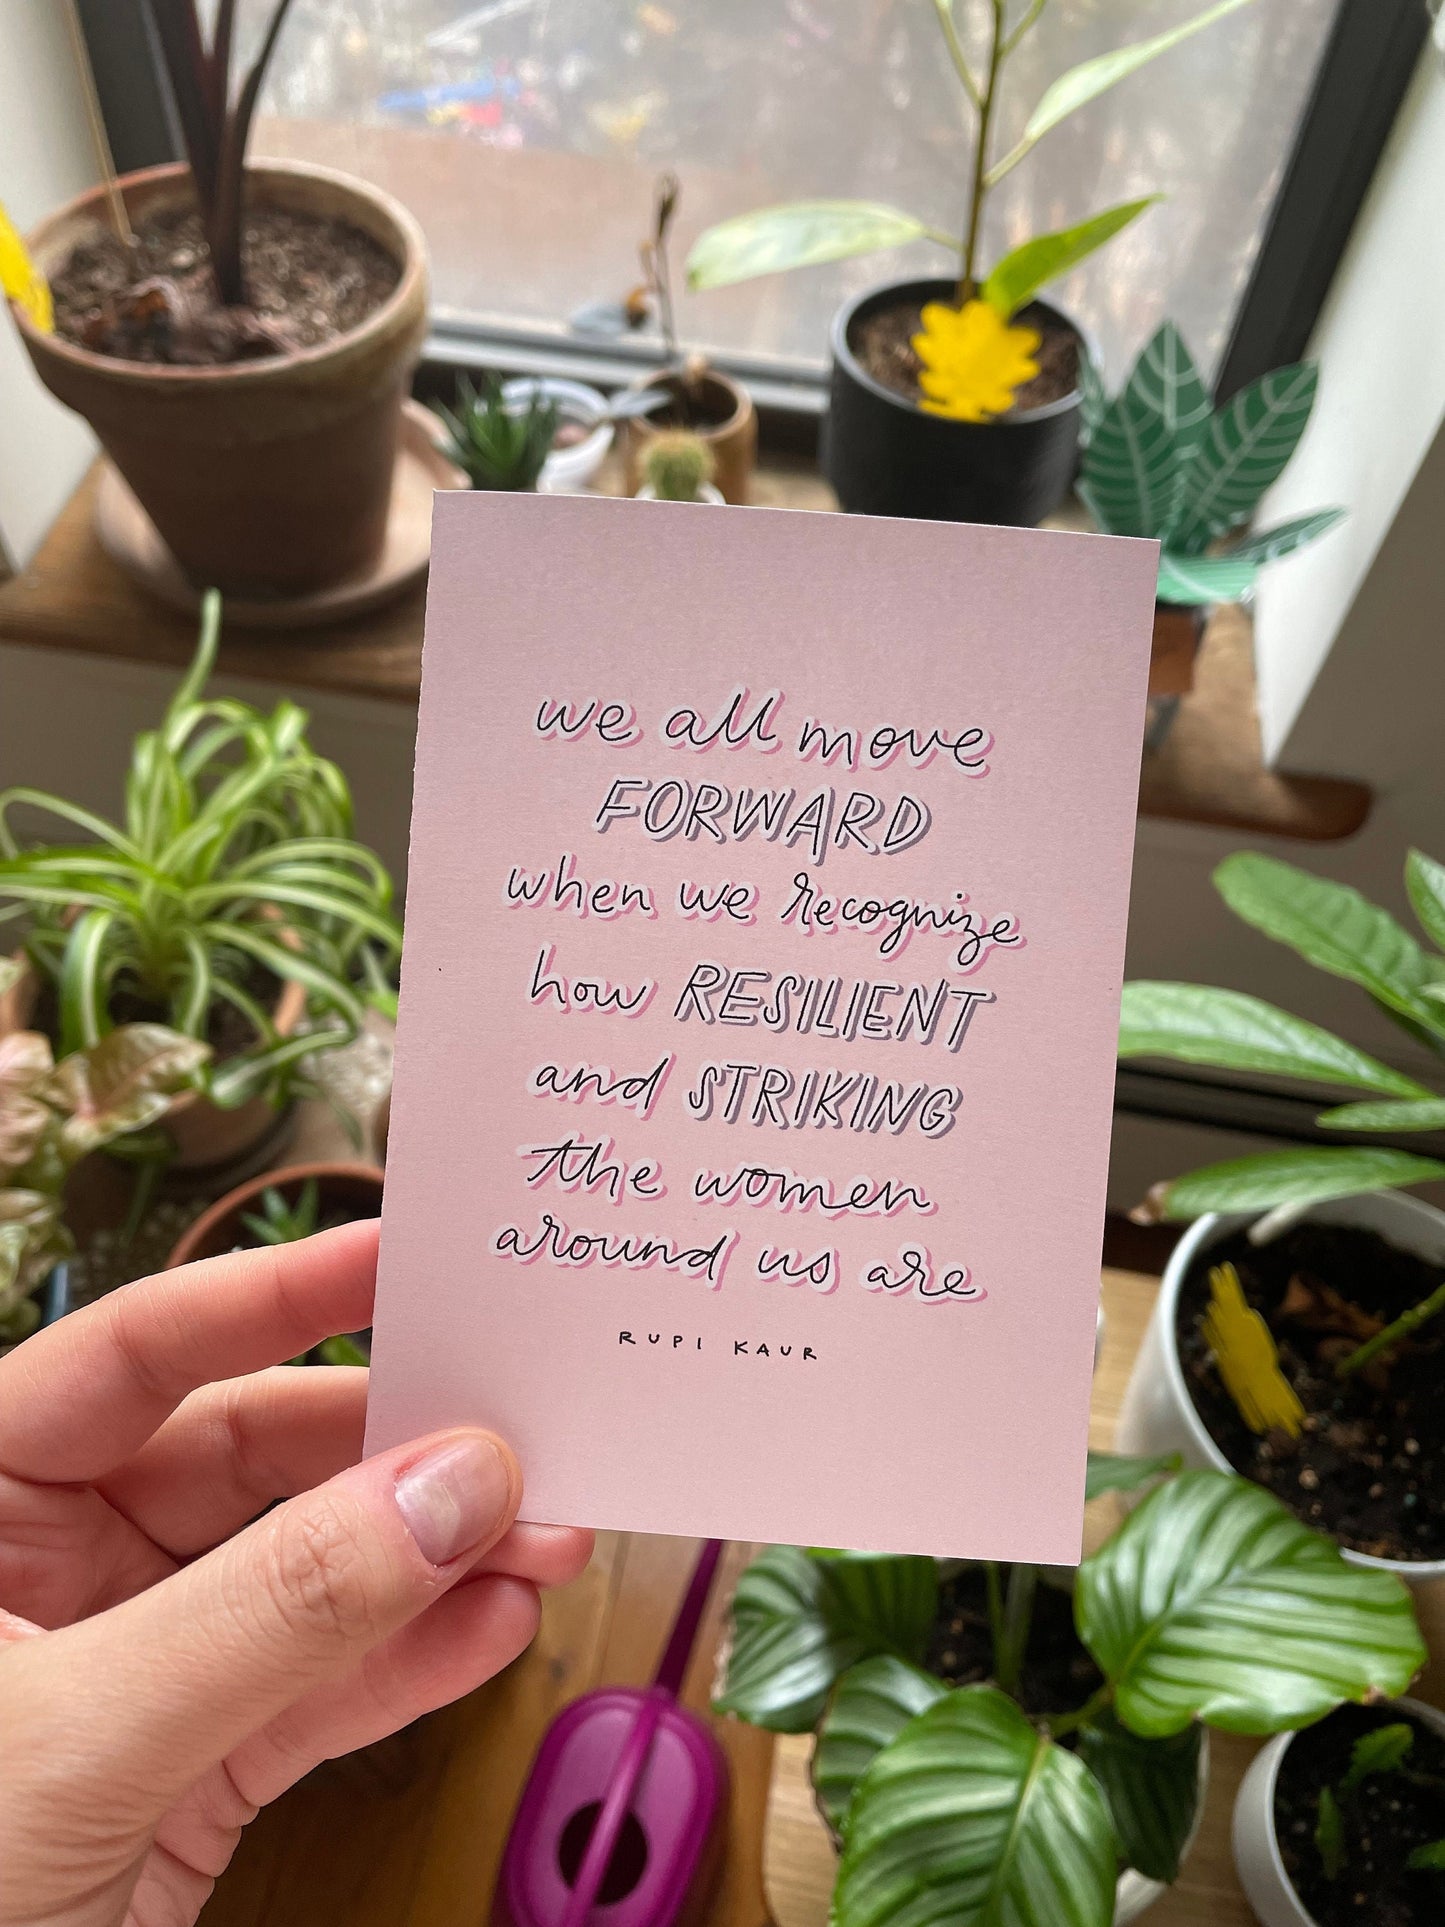 Rupi Kaur - Resilient and Striking Women Card